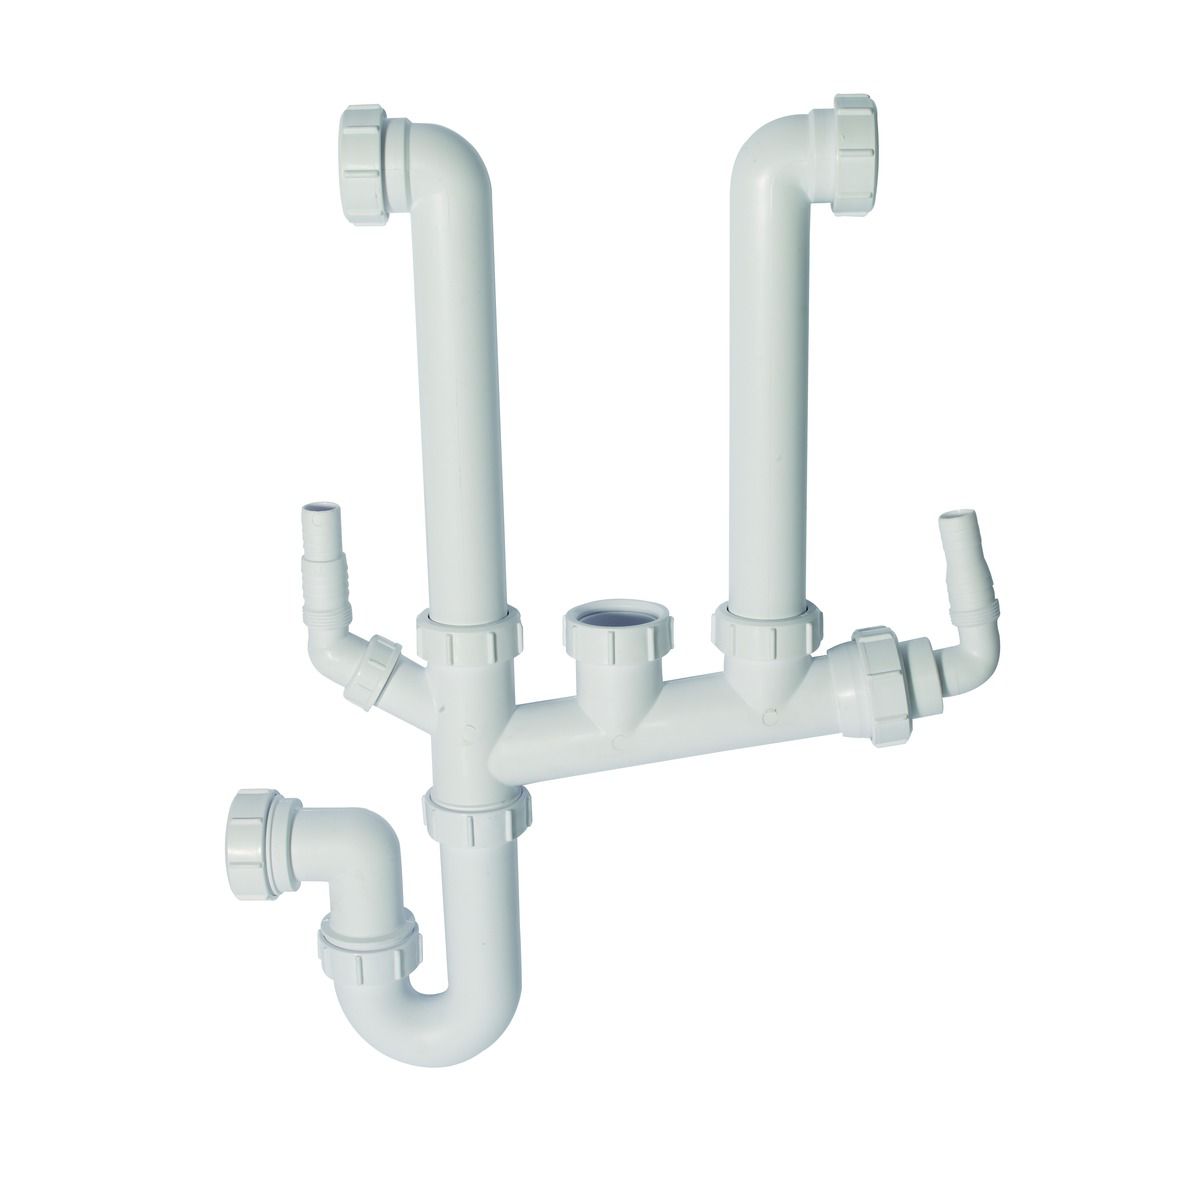 Image of McAlpine SSK2 Double Bowl Space Saver Kit - 38mm